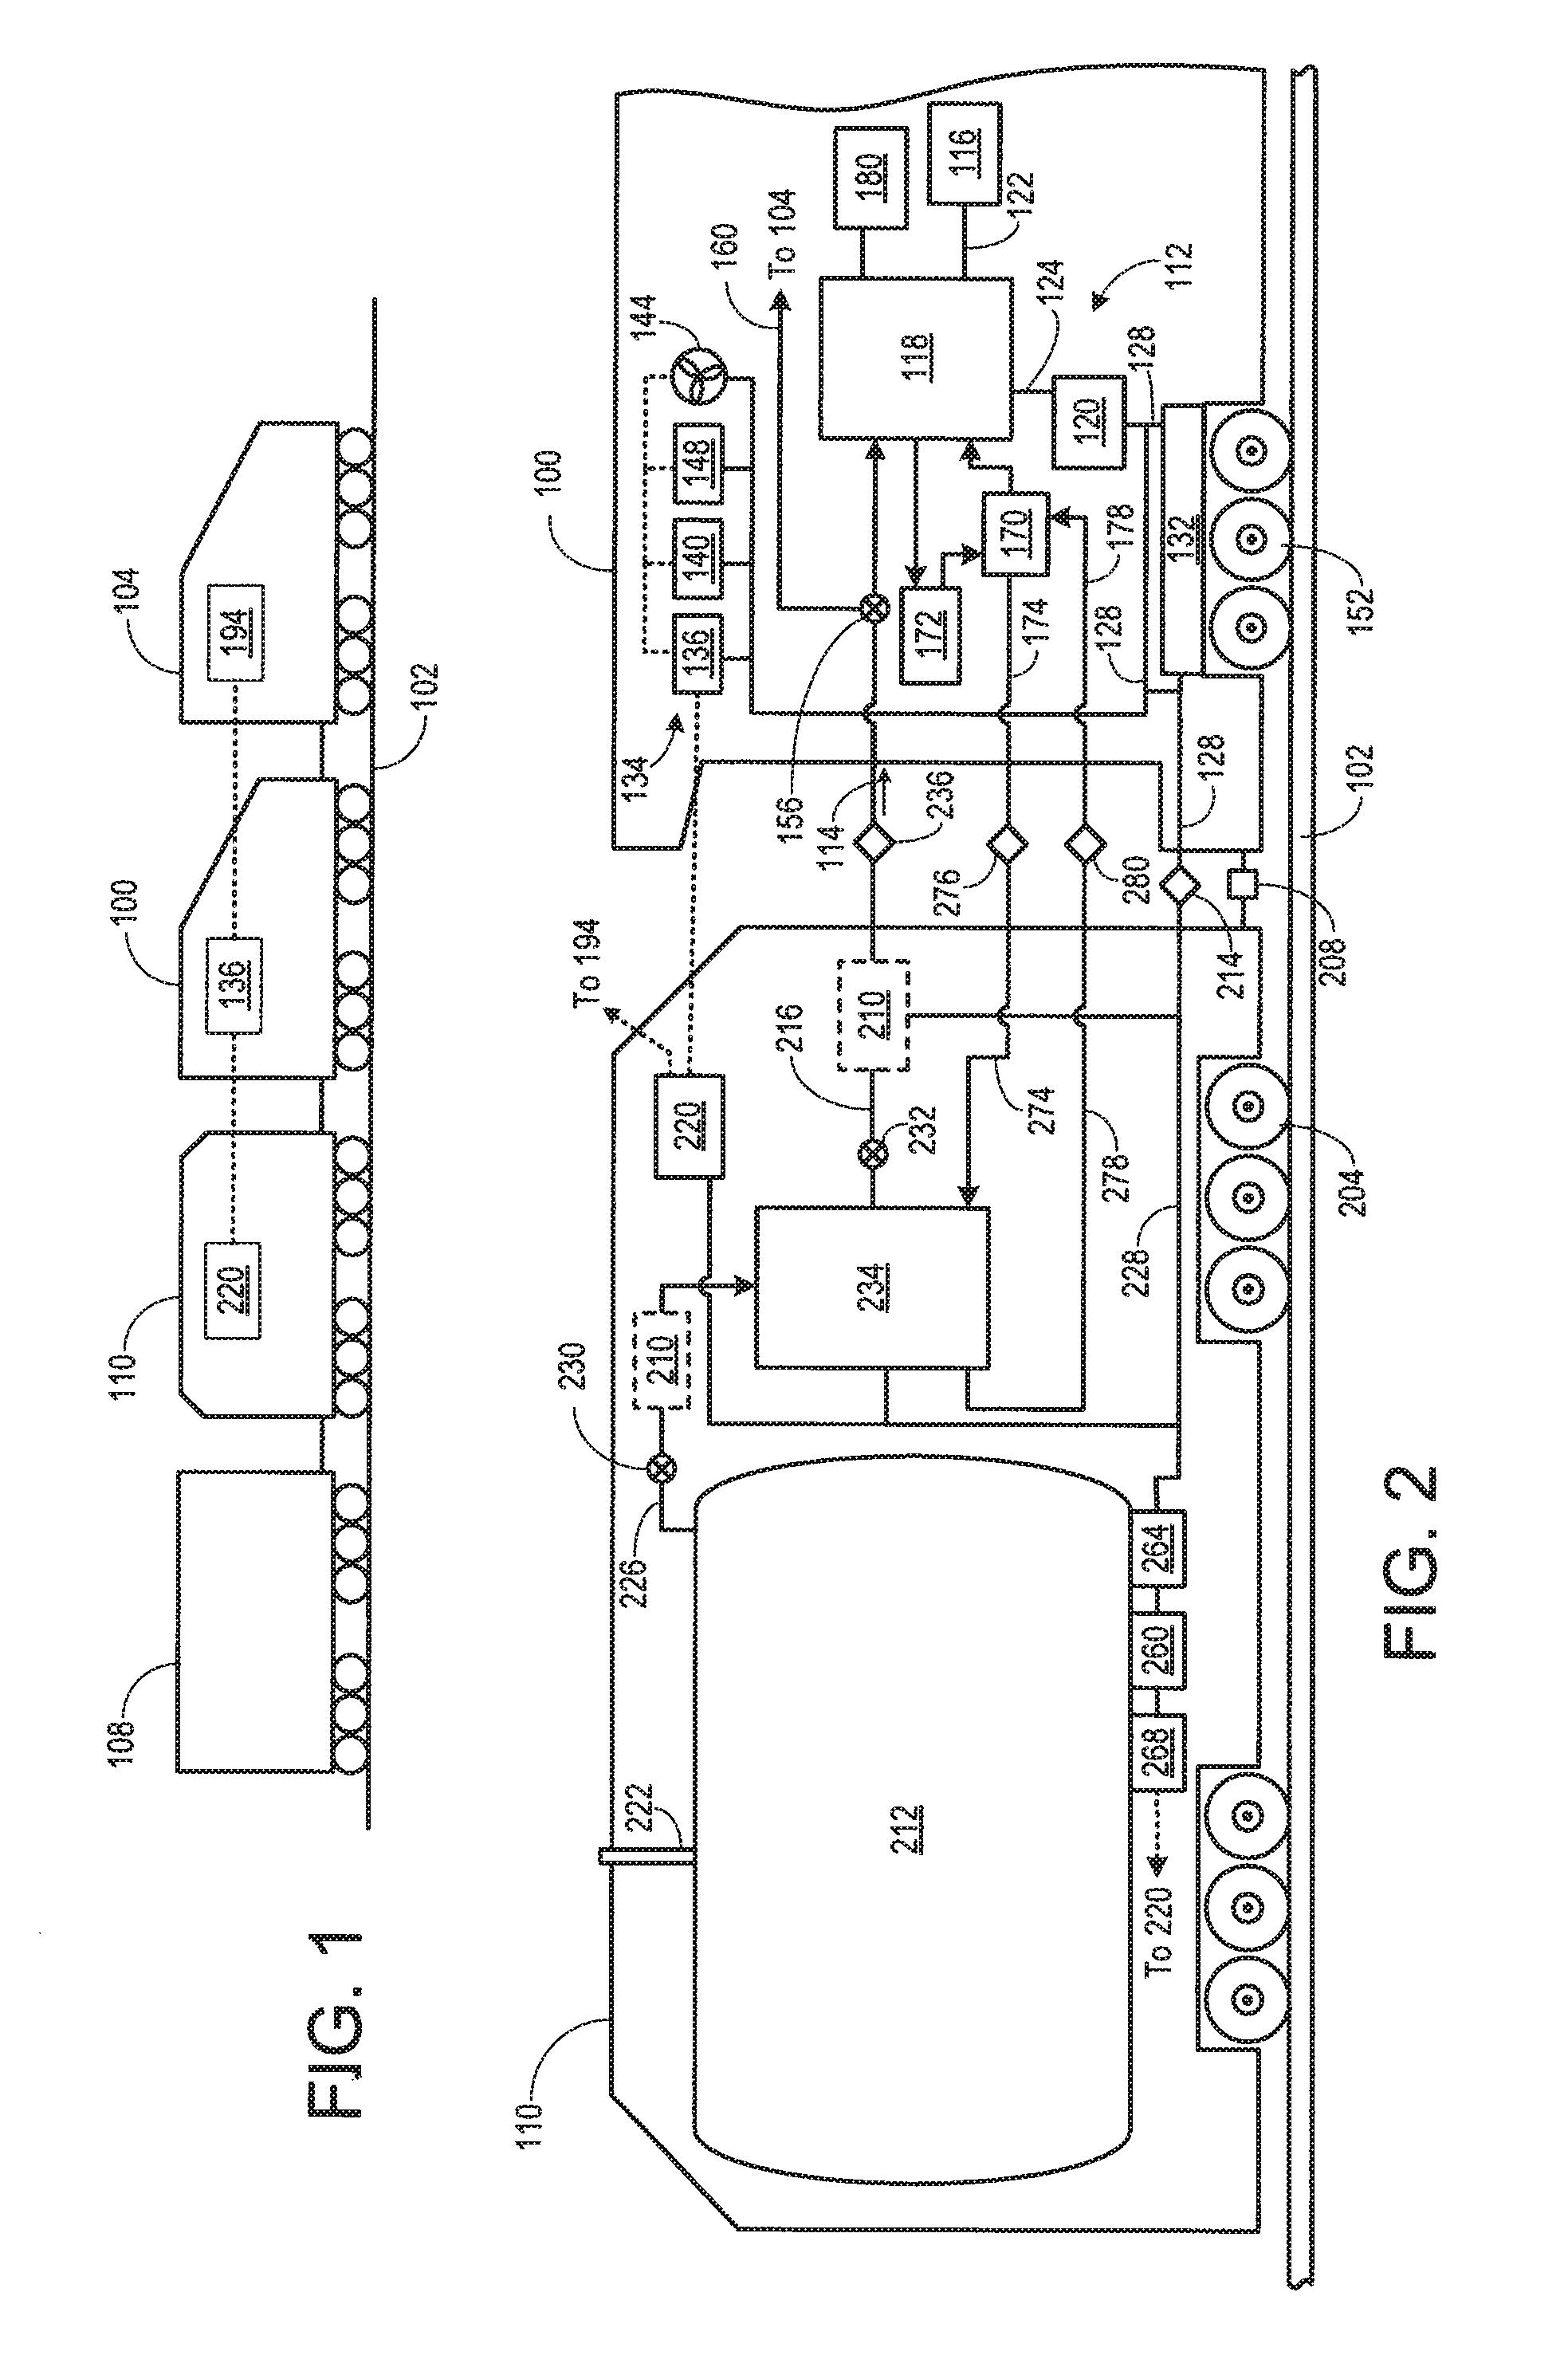 Method and systems for storing fuel for reduced usage